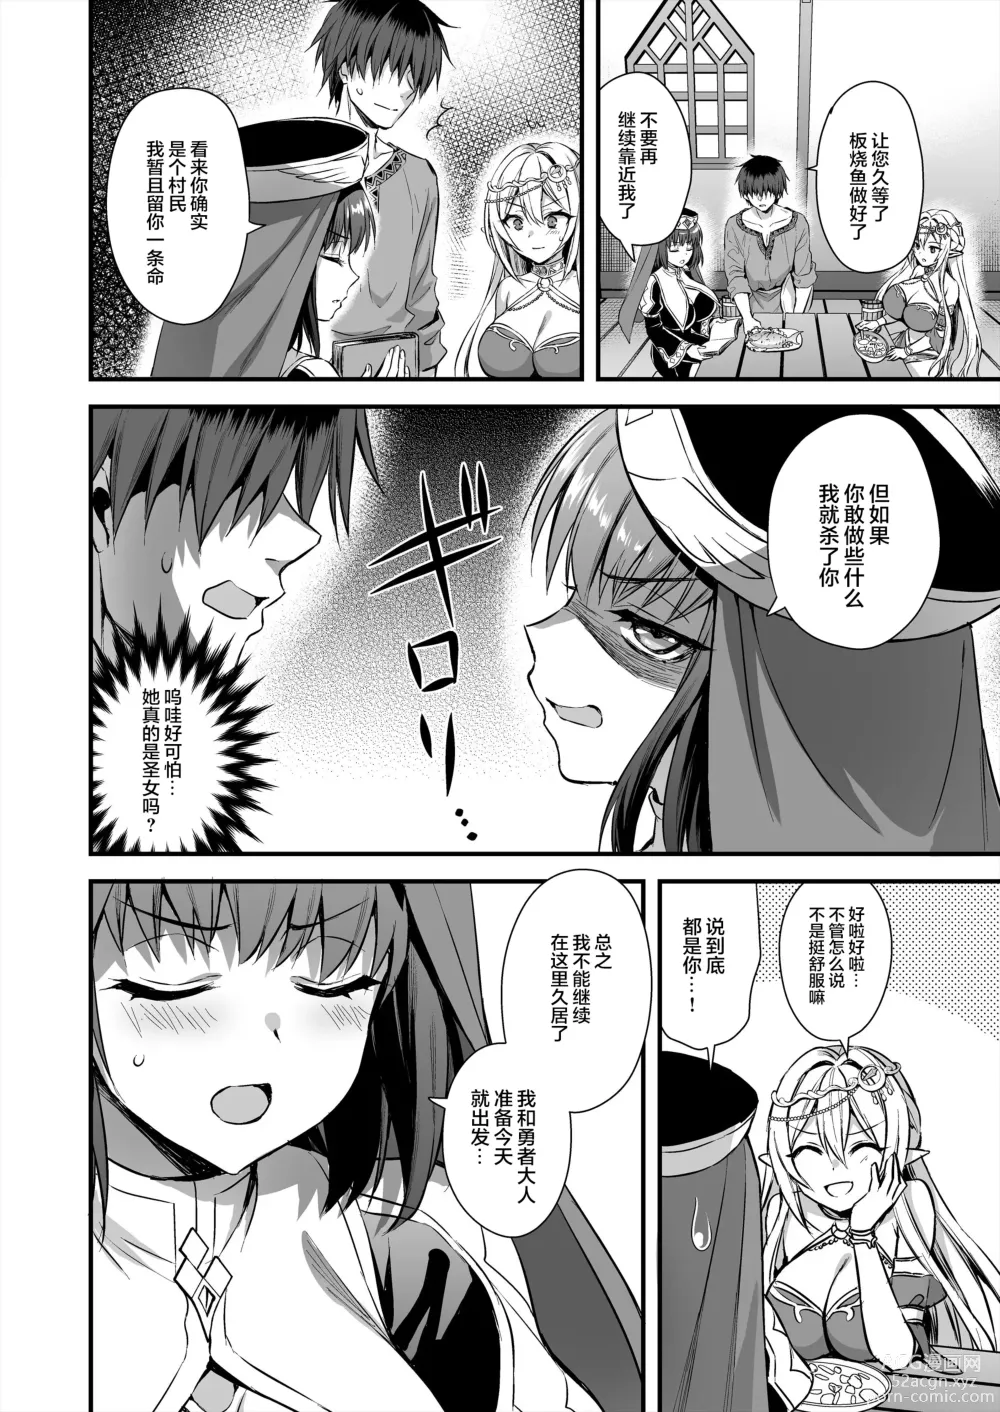 Page 5 of doujinshi Other World Elf Estruss Magic Eye 5 ~Time Stop Edition~